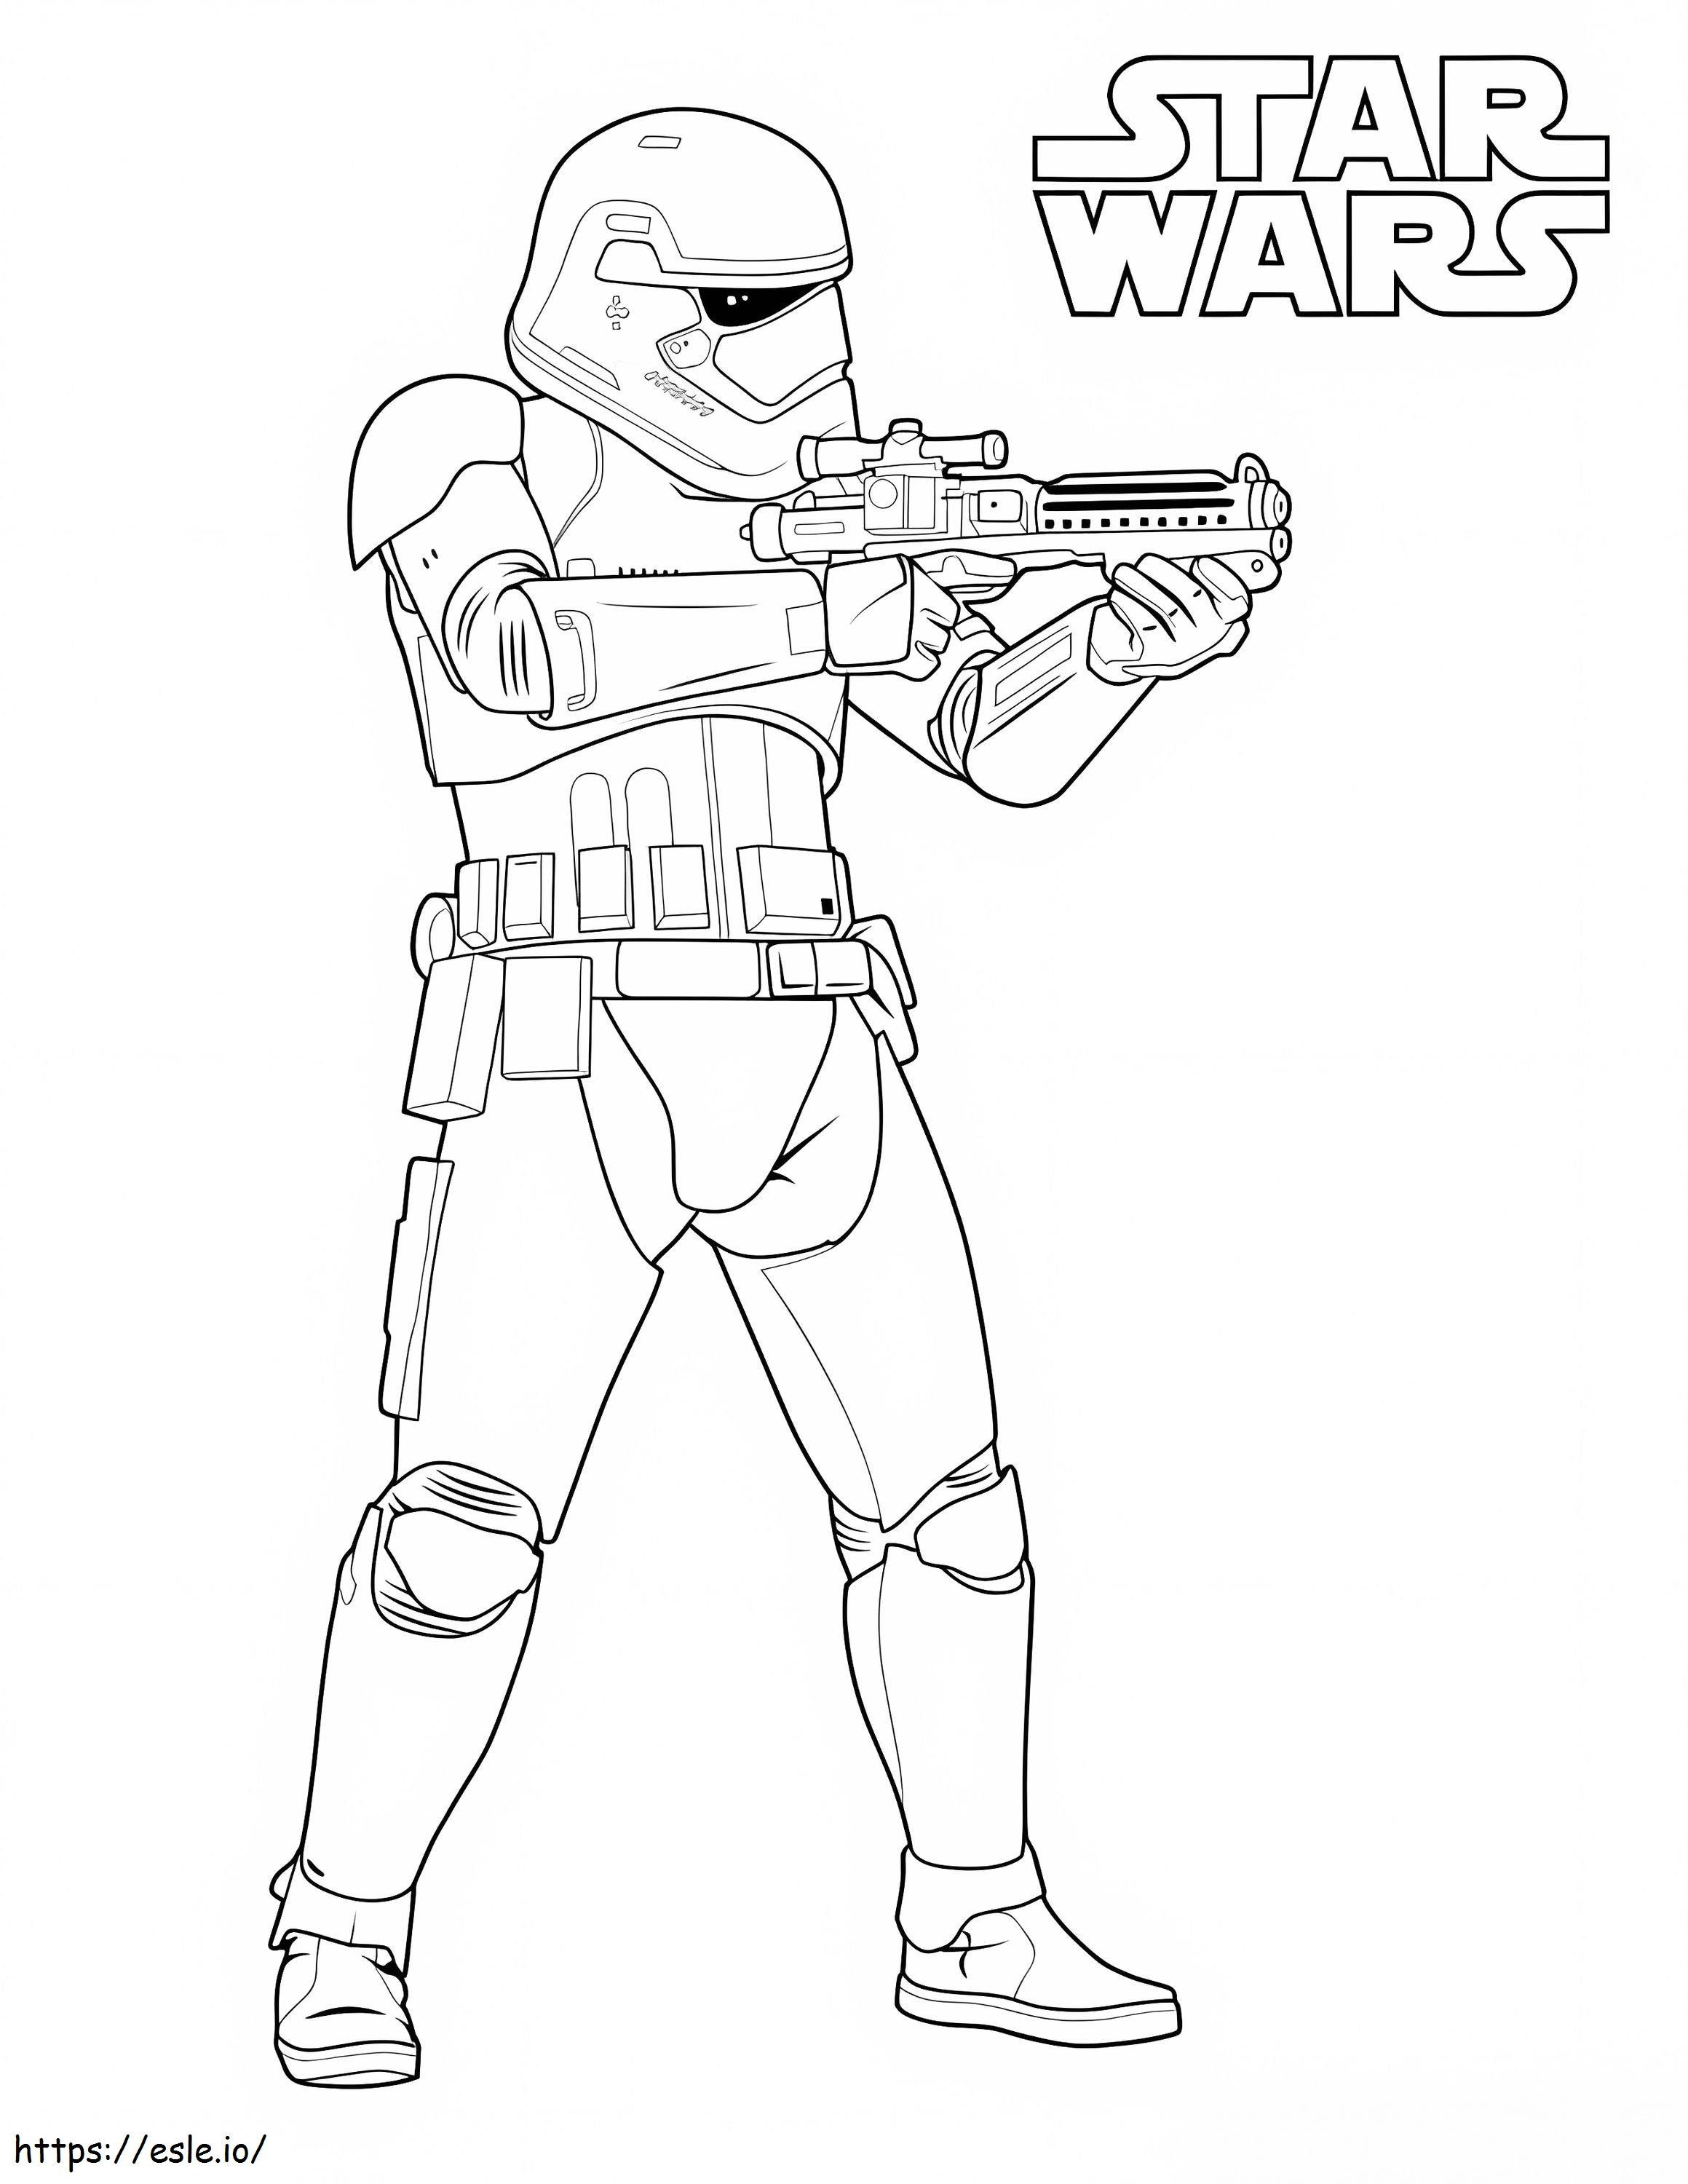 Stormtrooper Star Wars coloring page